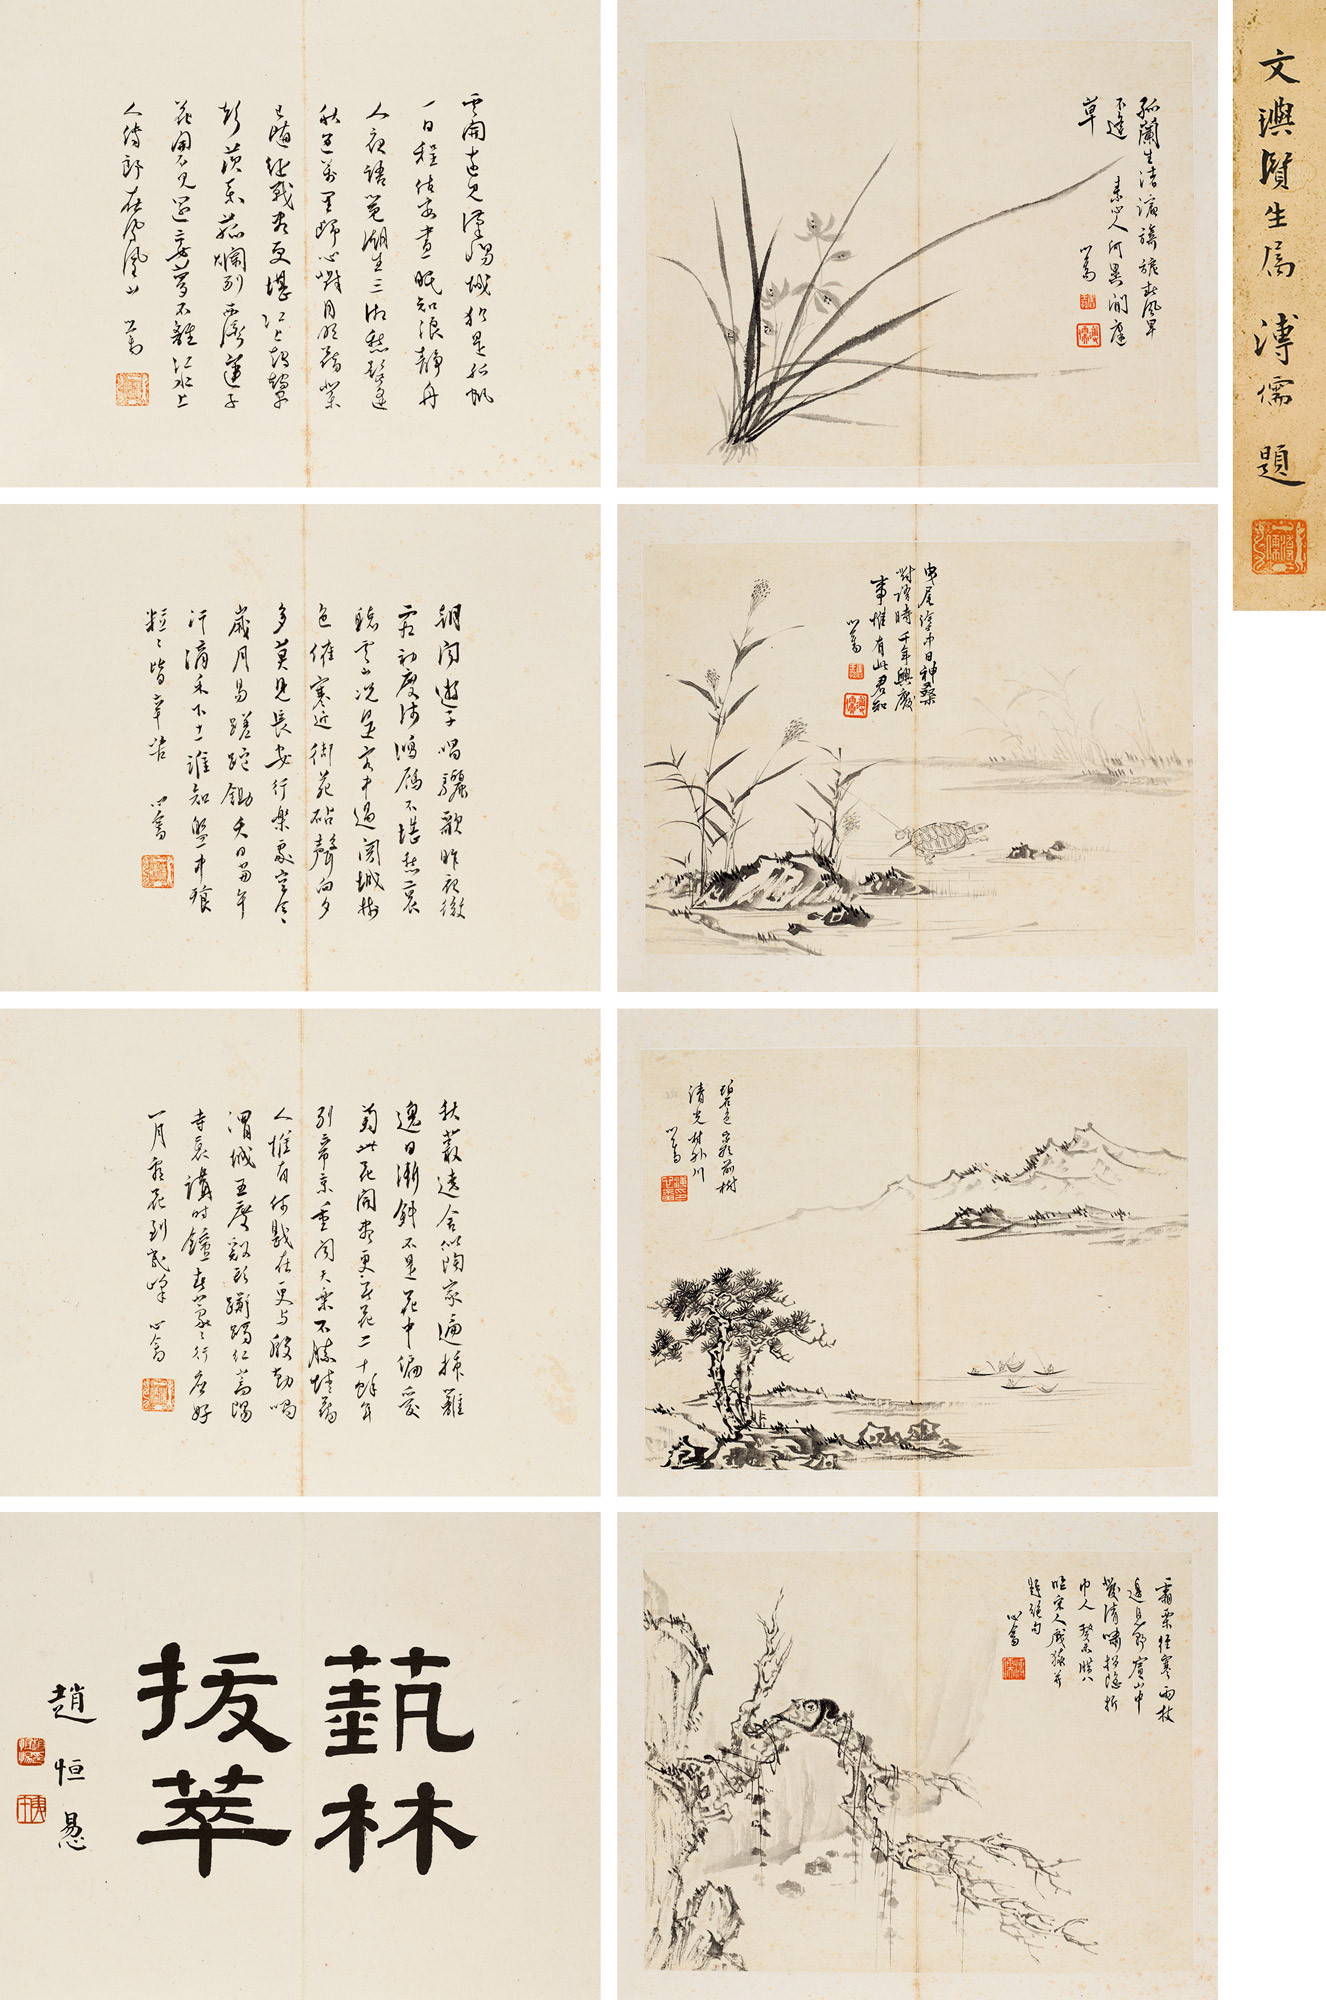 album of landscape and calligraphy